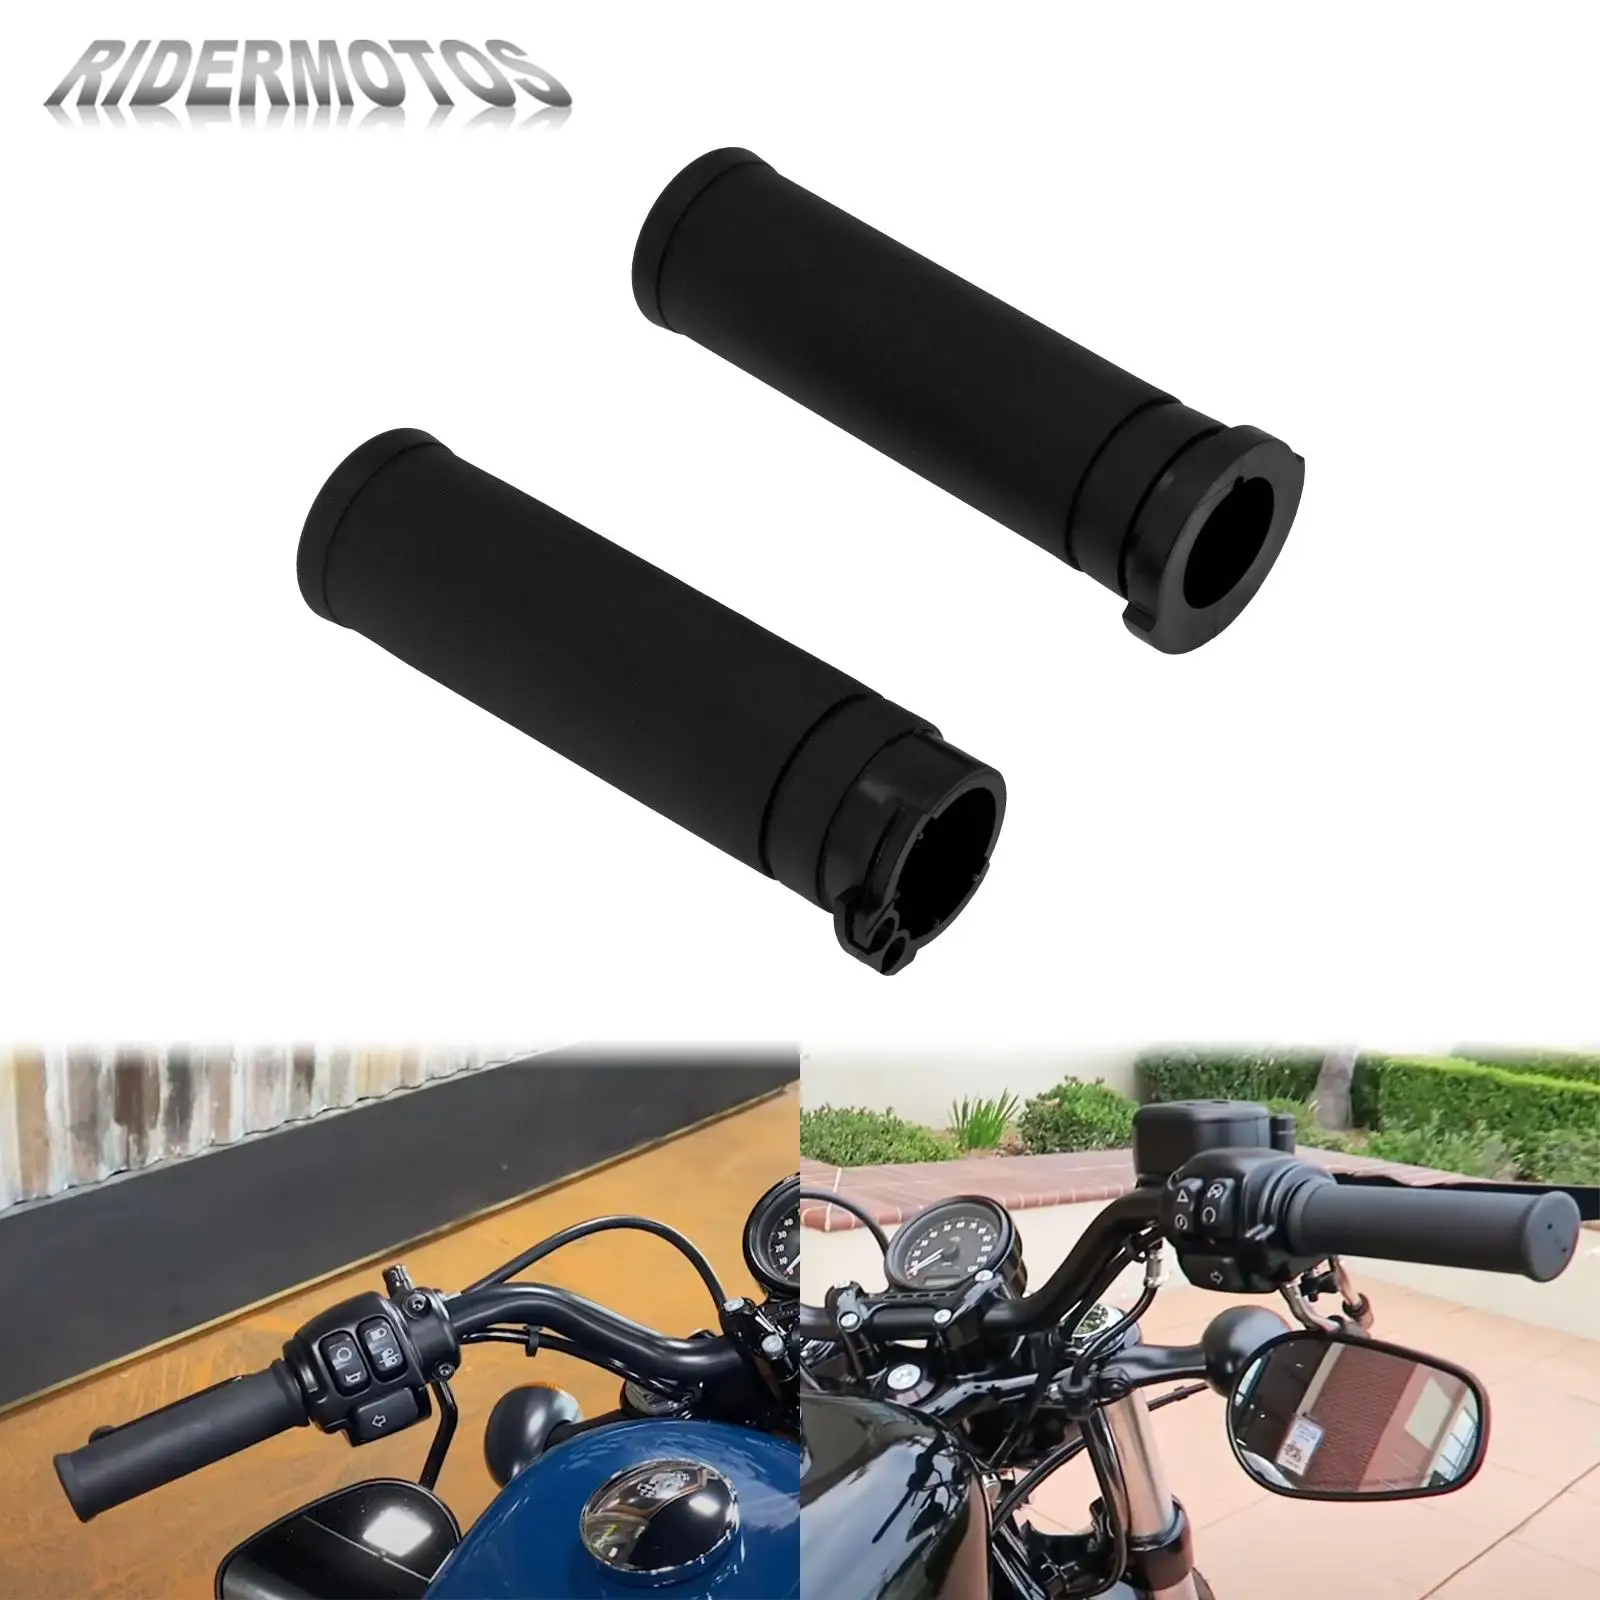 

Motorcycle 1"25mm Handle Bar Black Hand Grips For Harley Sportster XL883 XL1200 Dyna Touring Road Electra Glide Softail Custom